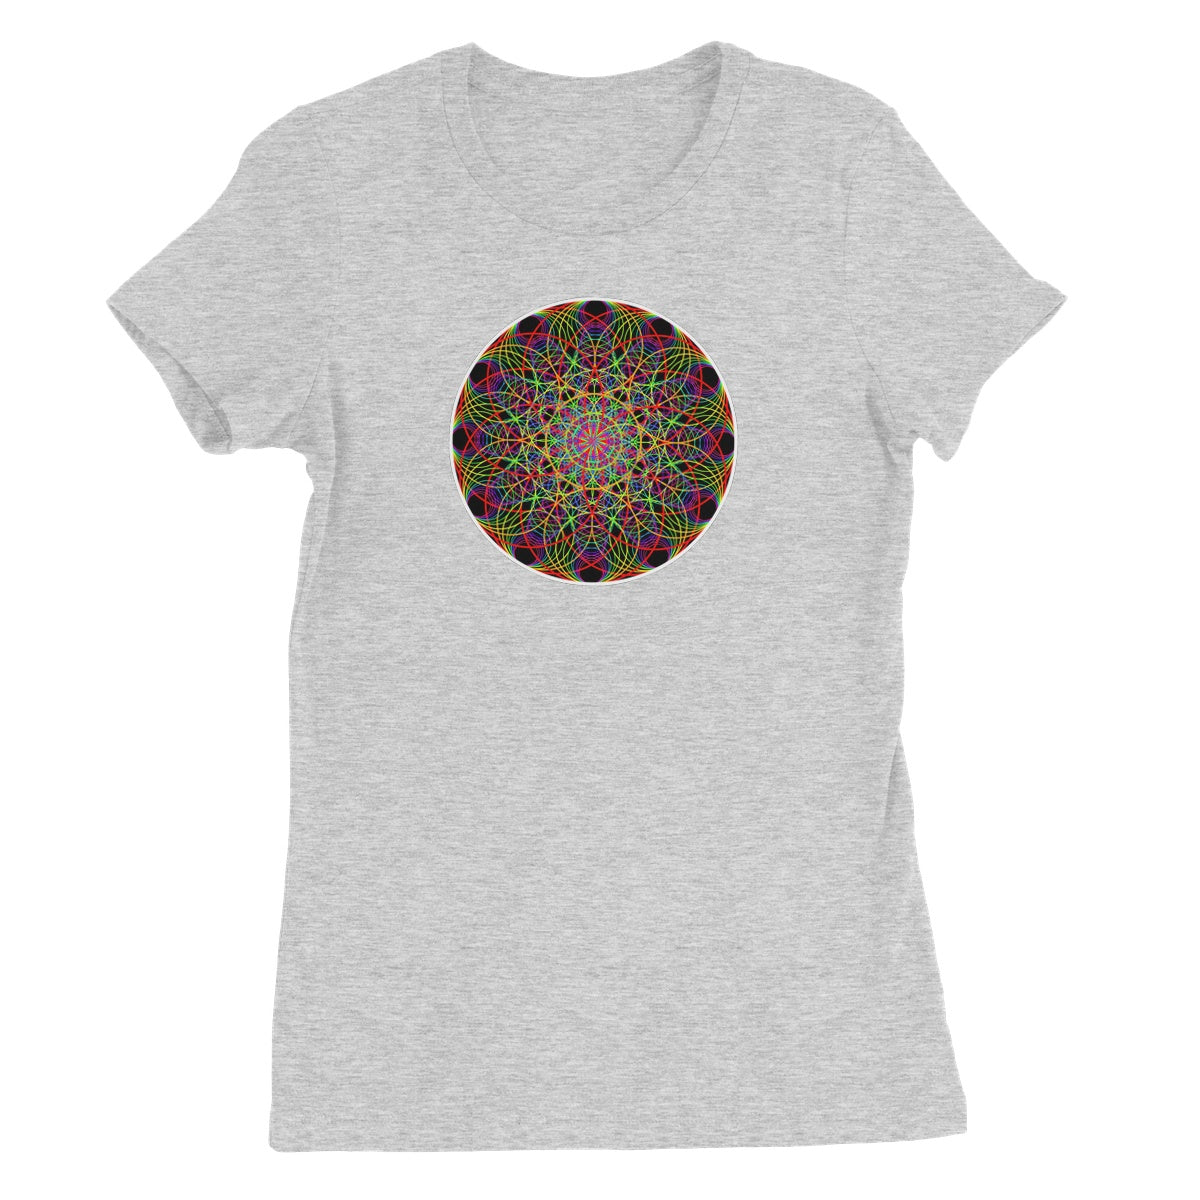 Twelve Sound Waves in a Circle Women's Favourite T-Shirt